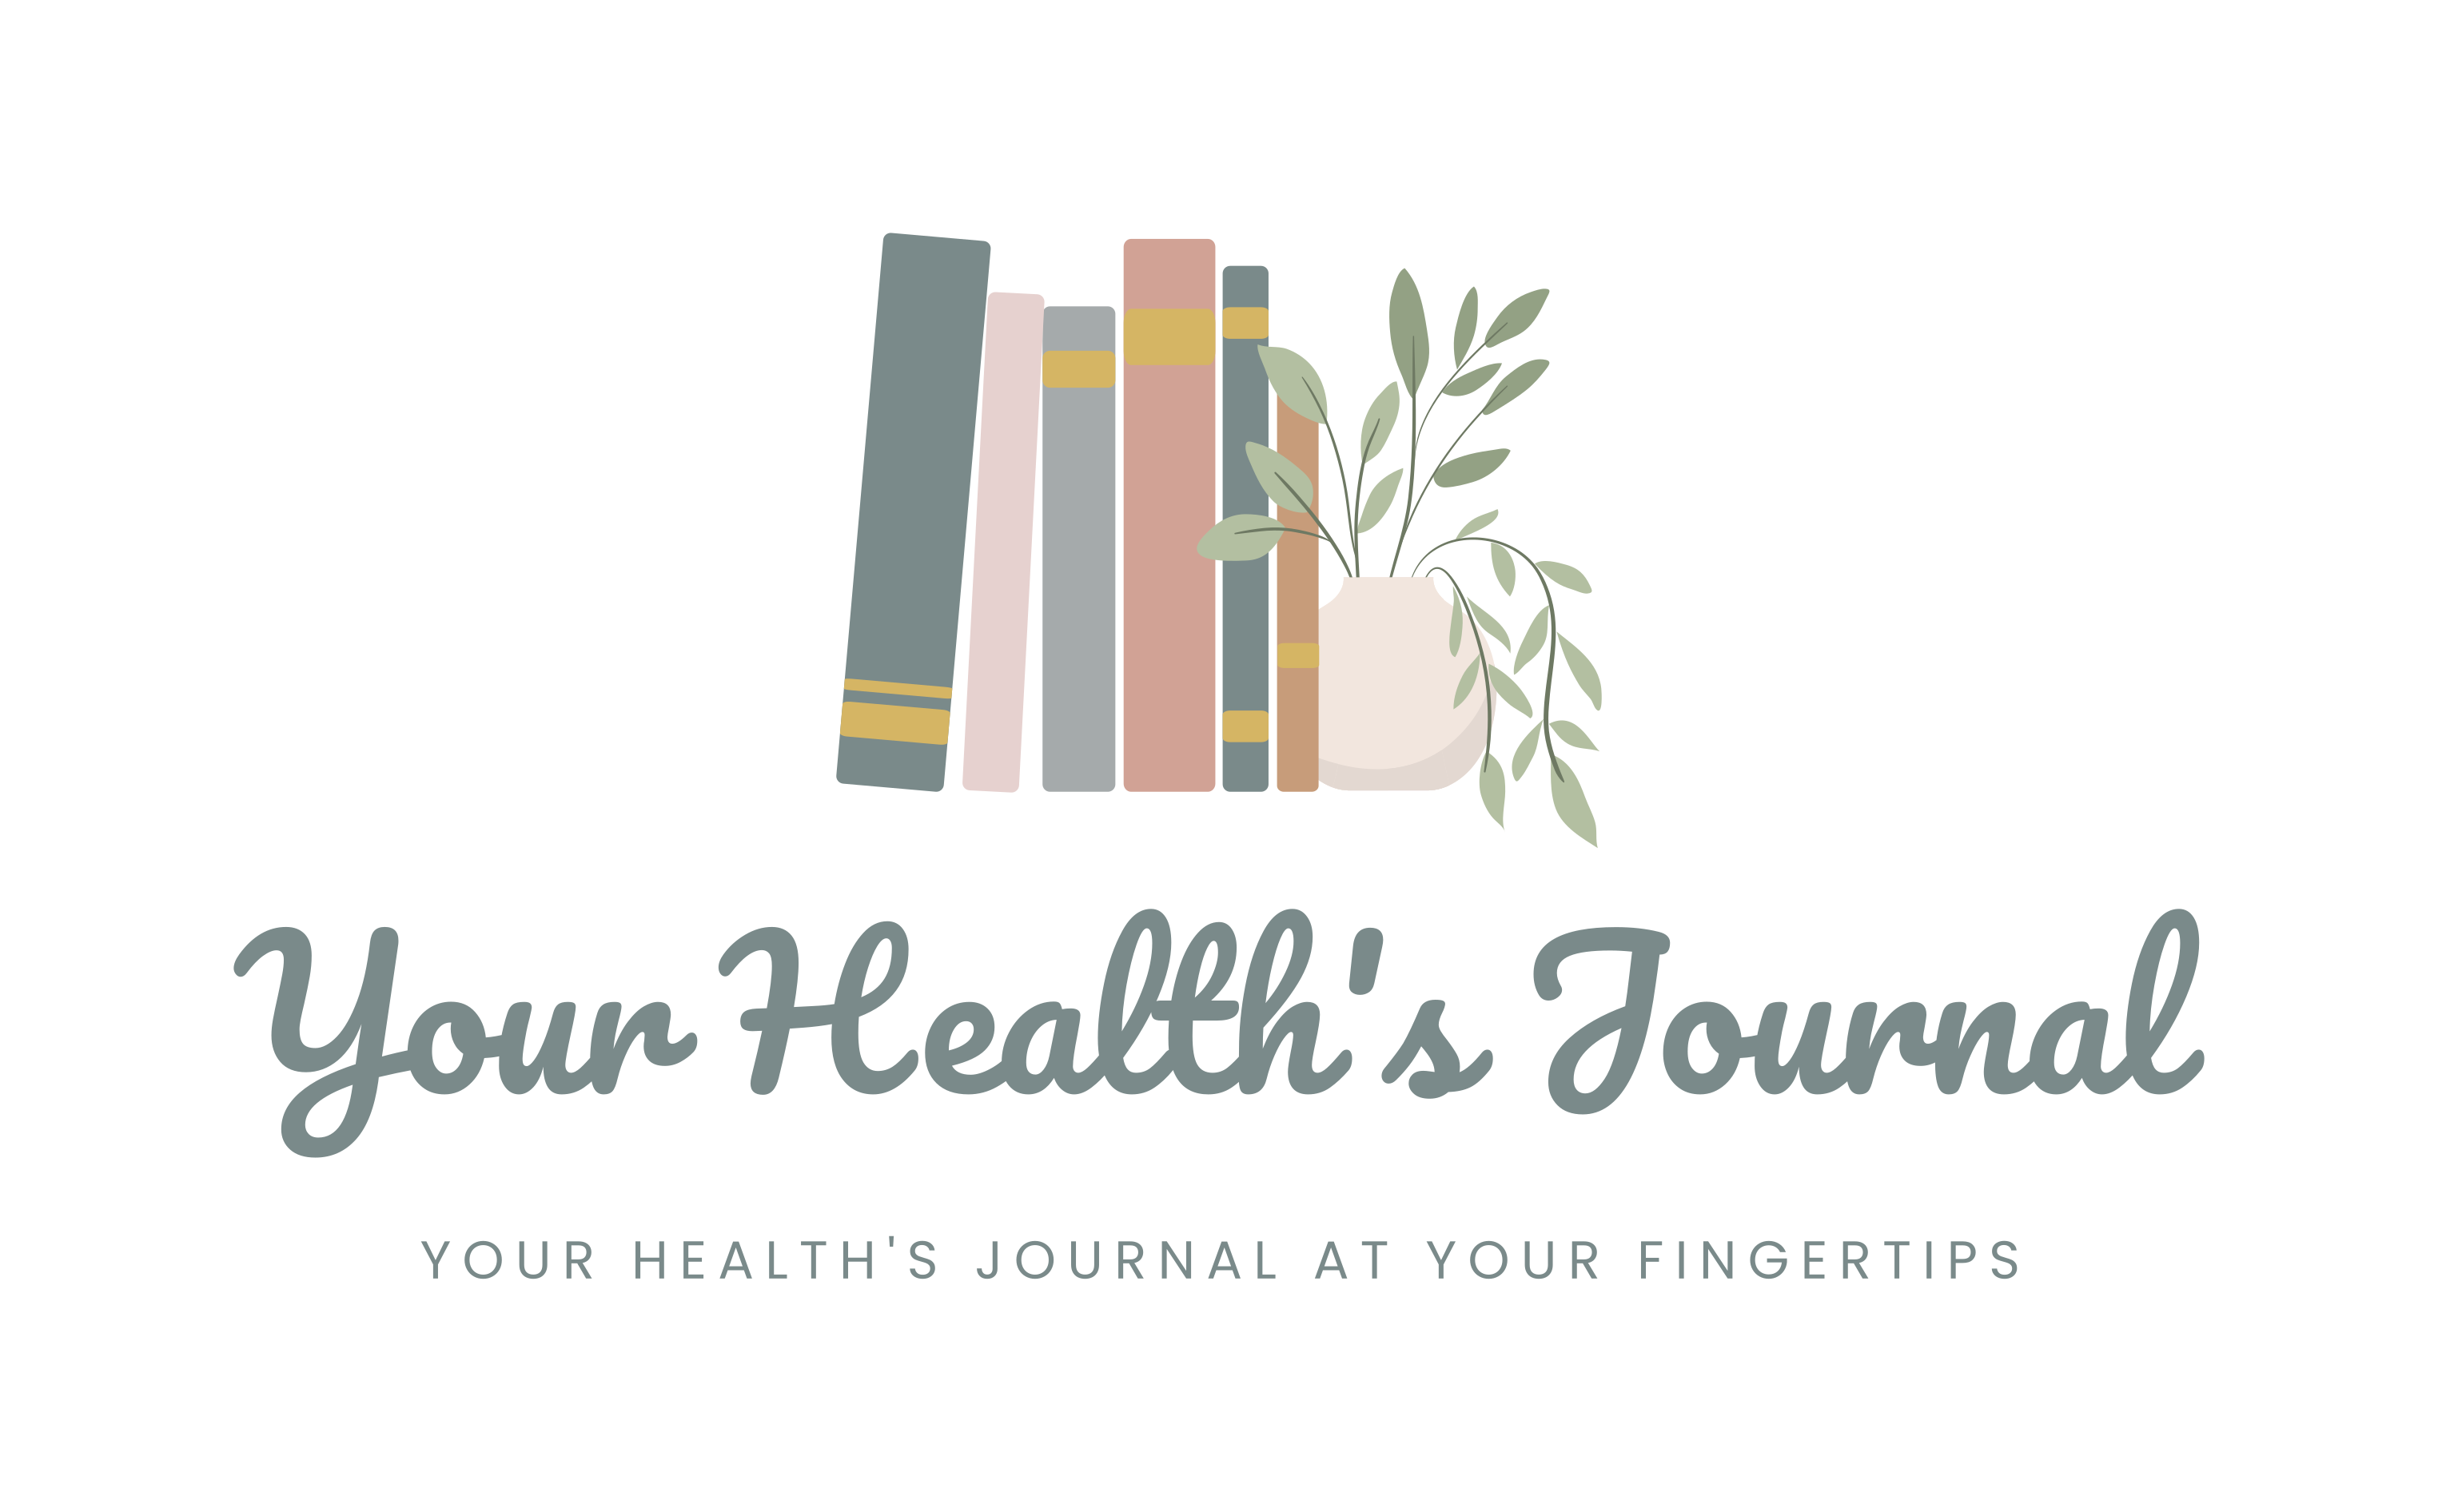 Your Health's Journal at your fingertips.